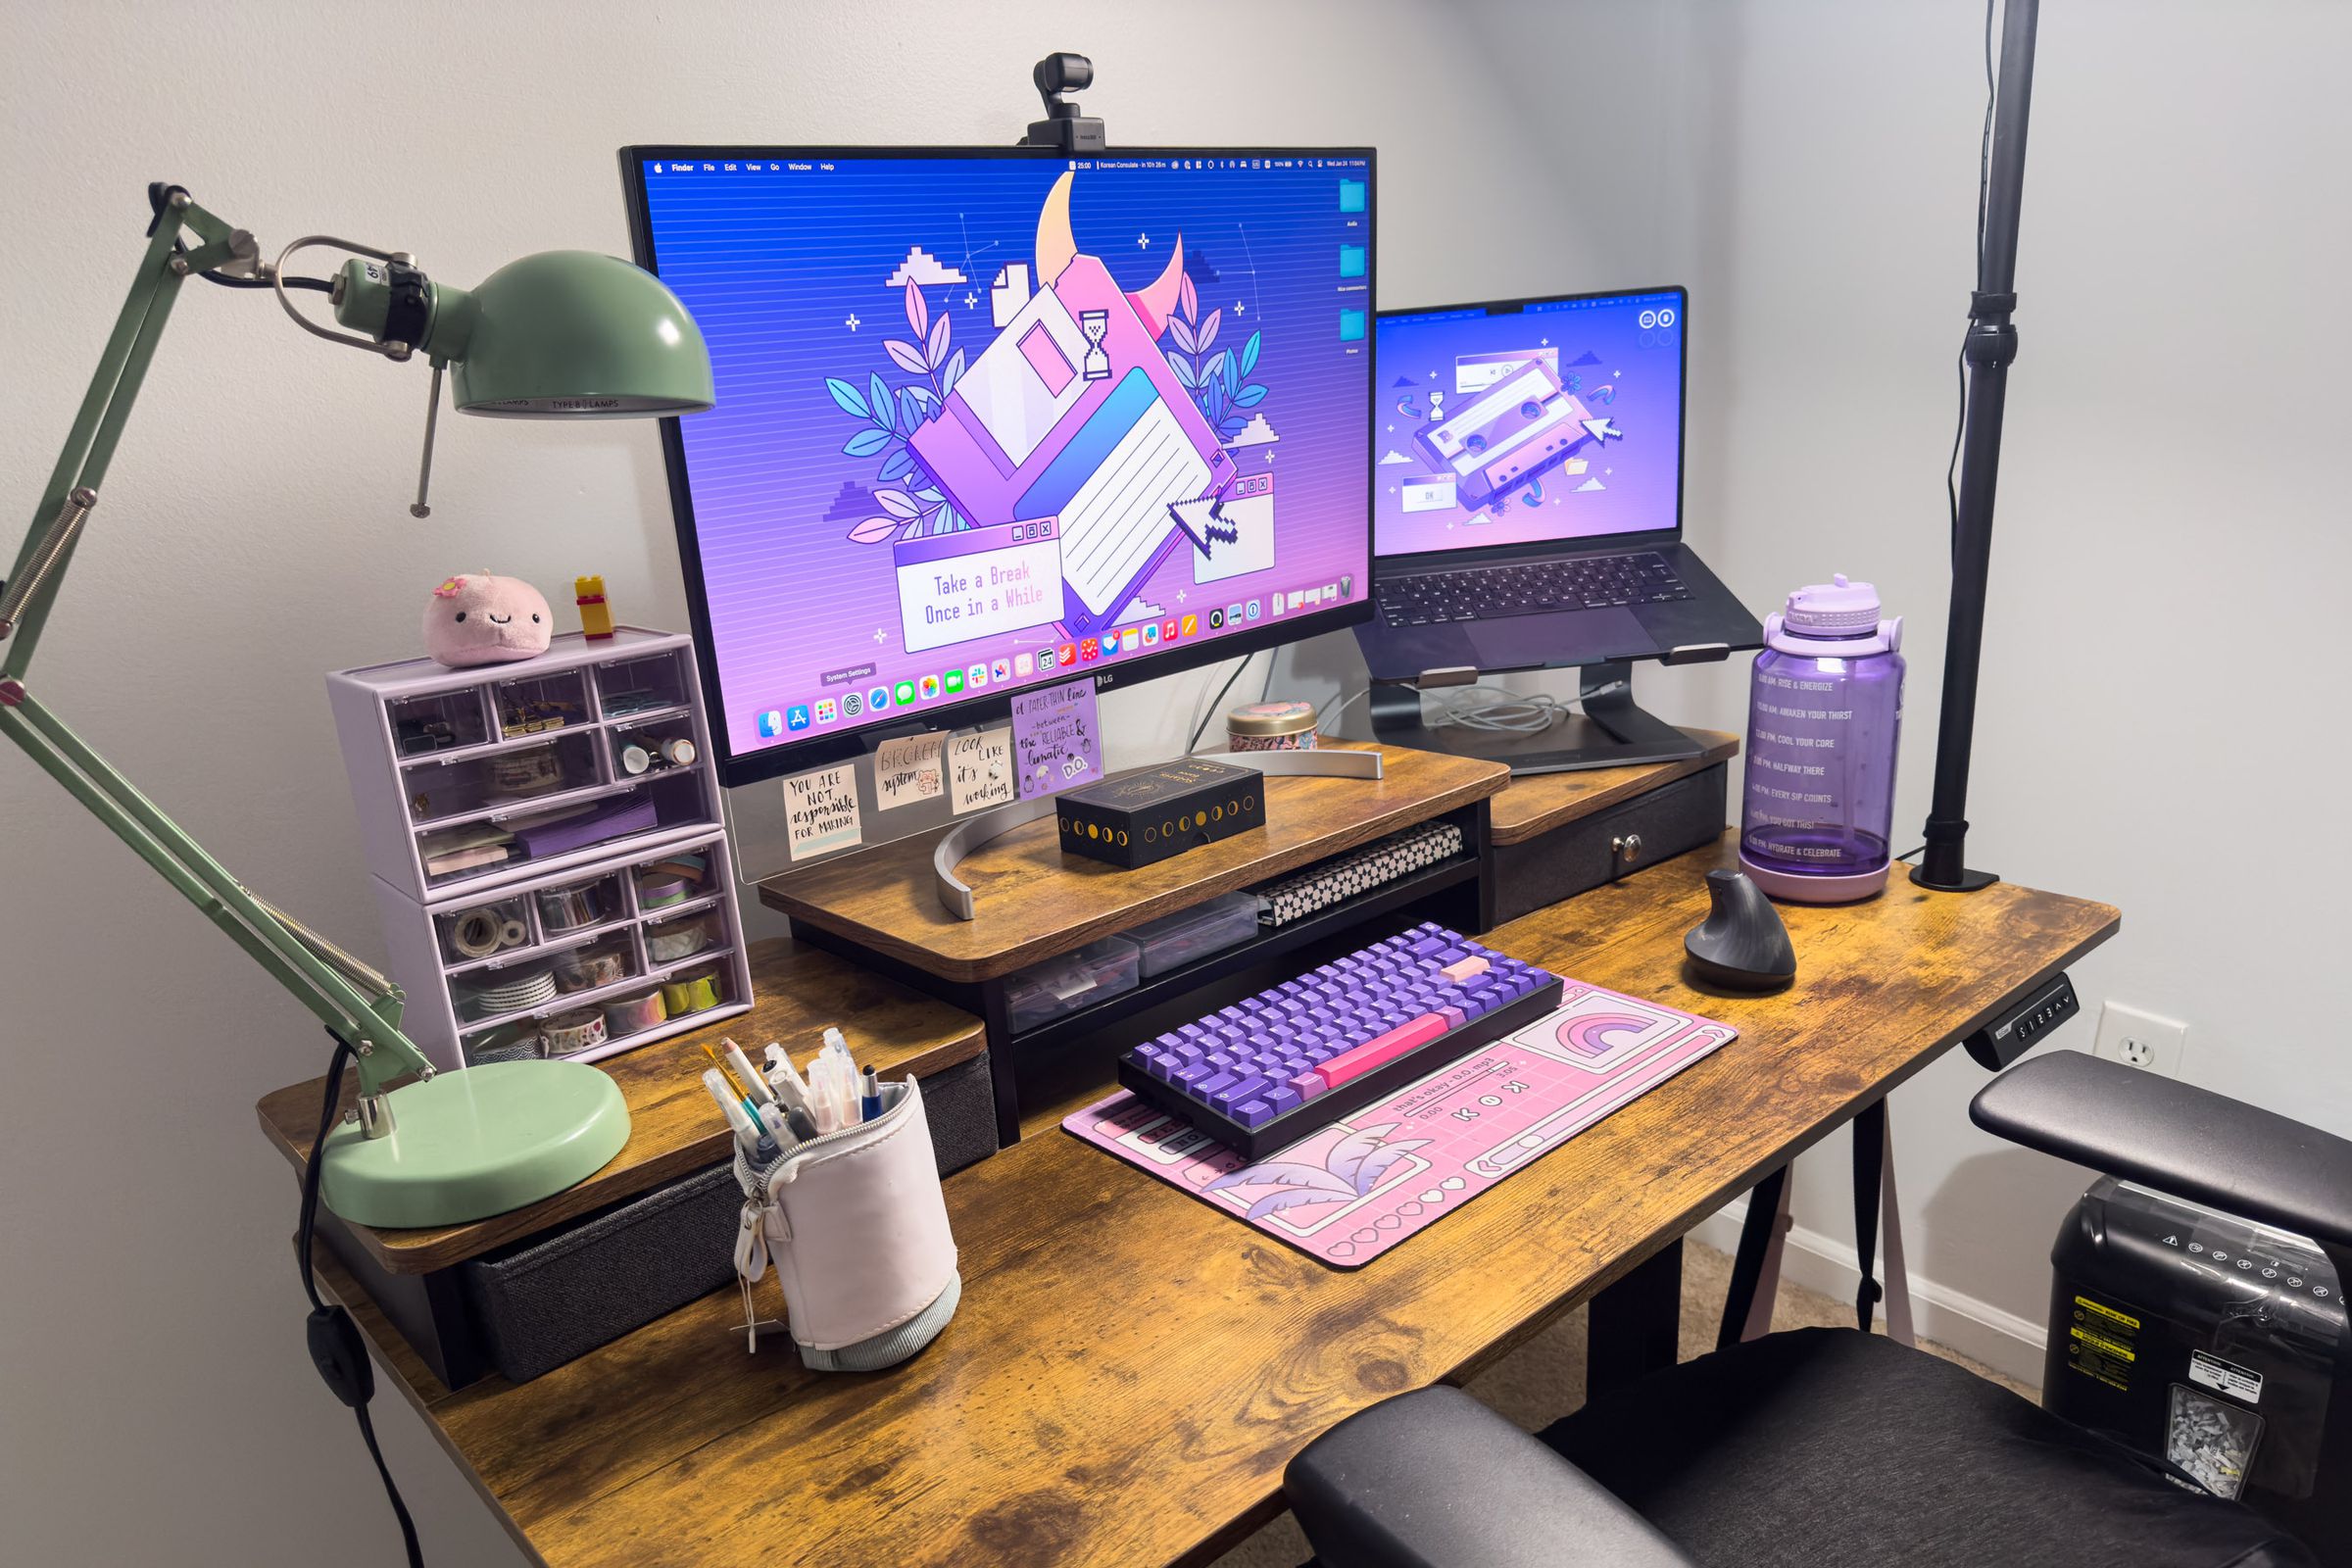 Desk with monitor, lamp in foreground, purple keyboard.